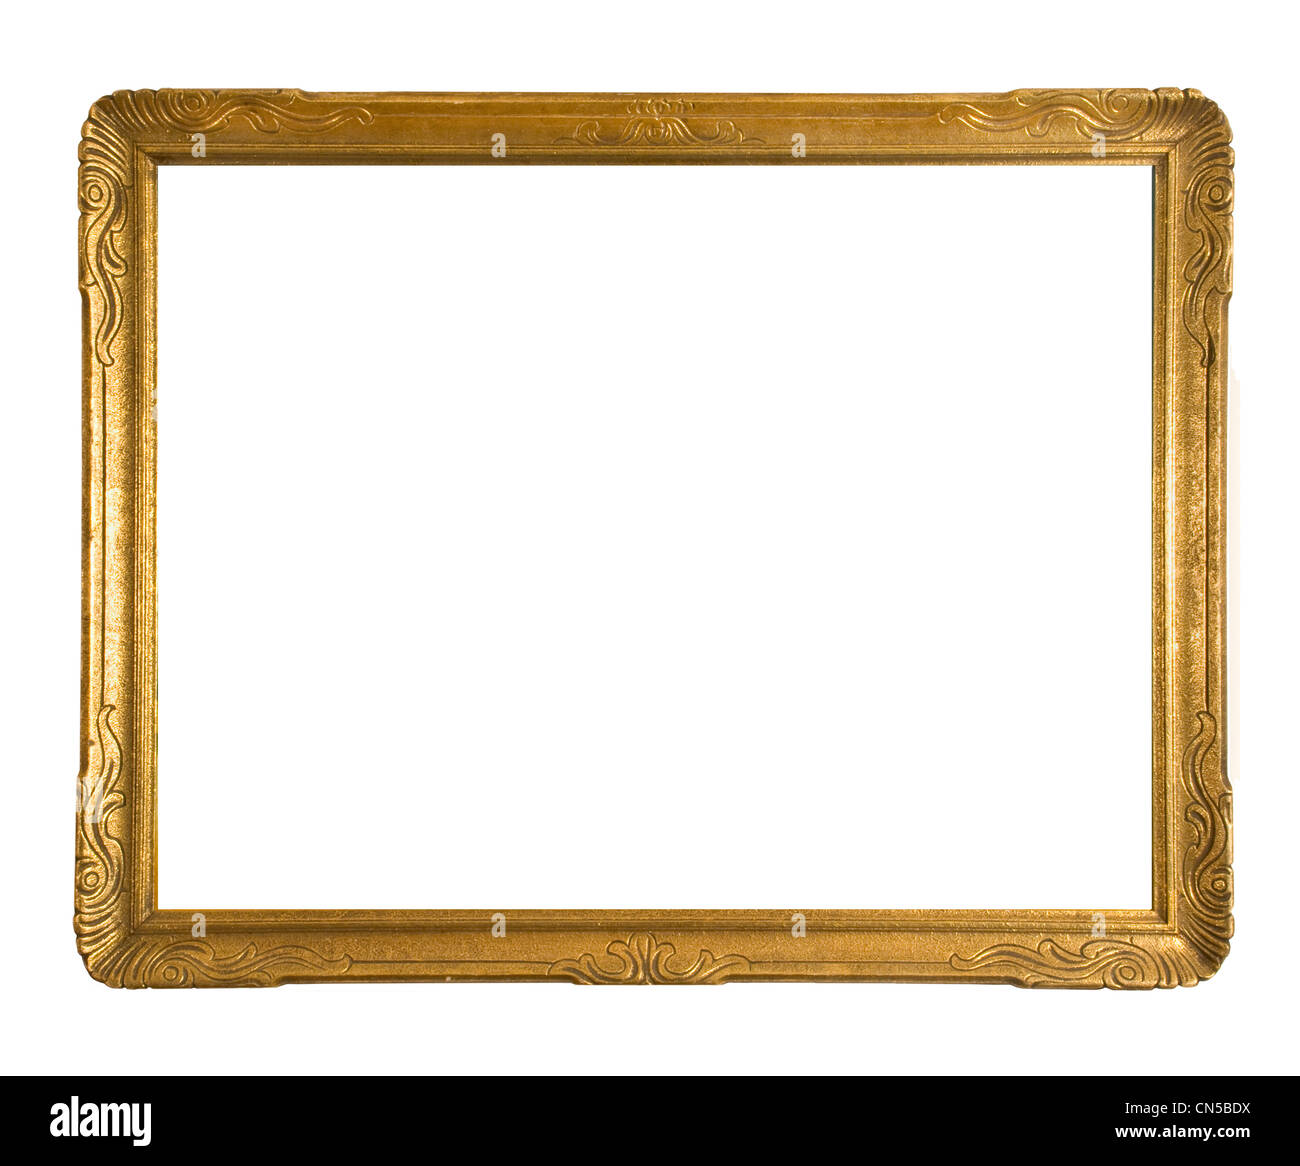 Antique gold ornate picture frame isolated on a white background Stock Photo